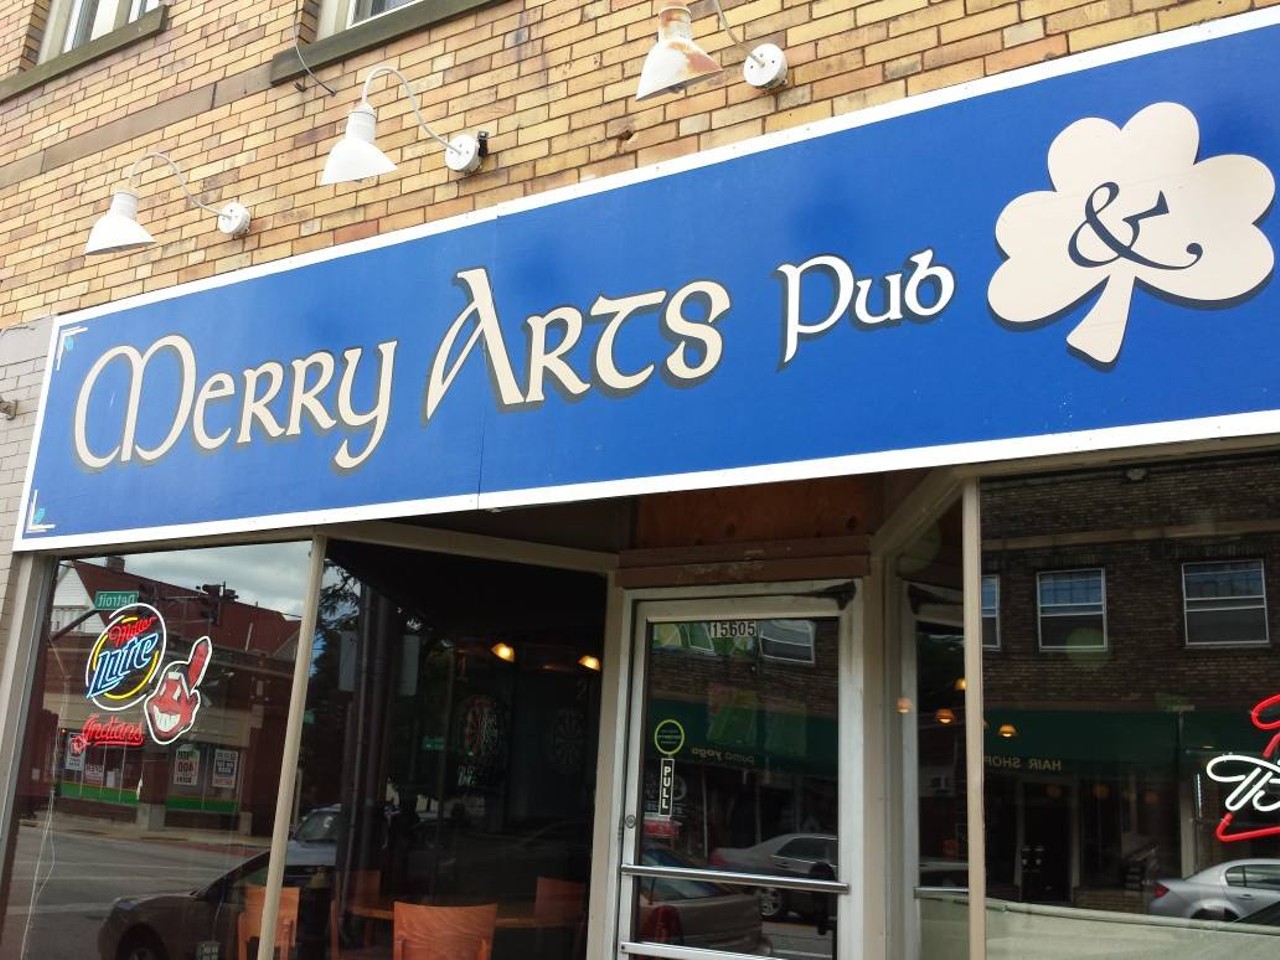  Merry Arts Pub and Grill
15607 Detroit Ave., Lakewood
Forget Taco Tuesdays, it&#146;s Taco Thursdays at Lakewood watering hole Merry Arts. The crispy fried-flour shells have garnered this low-key pub a cult taco following. Don&#146;t forget to thank Patty, the weekly taco chef, when she brings them over to your table.
Photo via Merry Arts Pub and Grill/Facebook